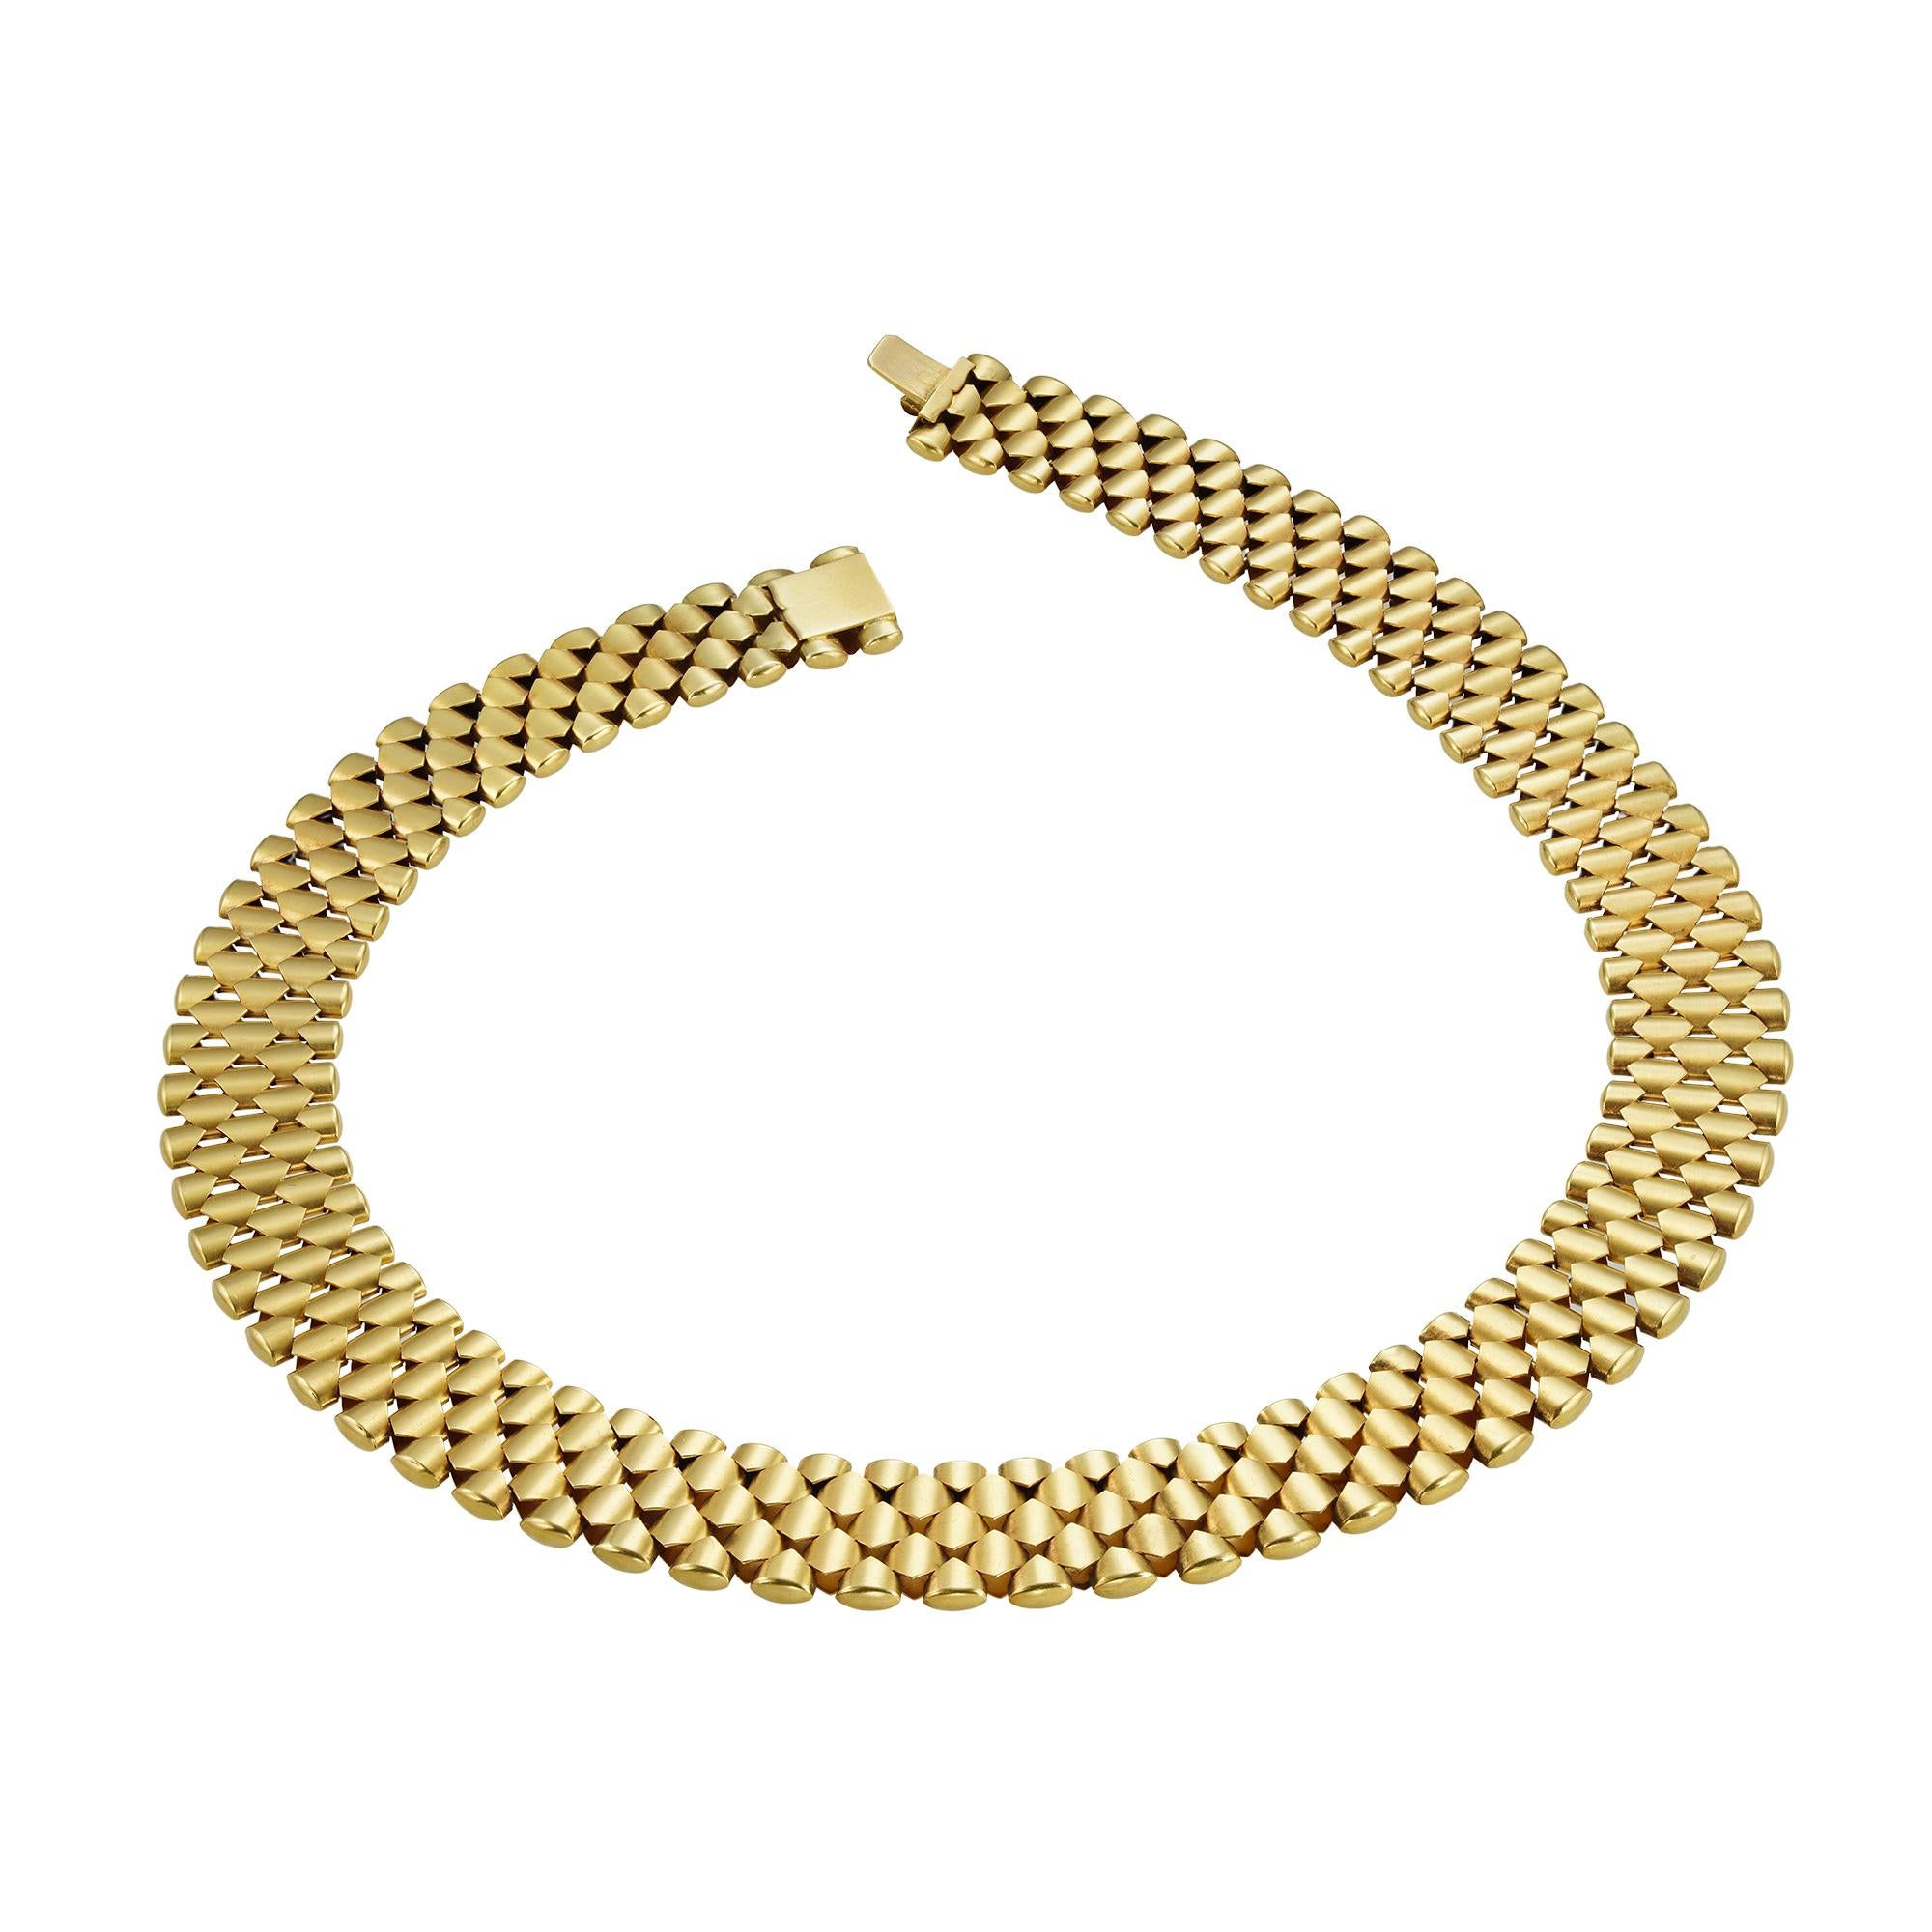 9ct gold collar necklace